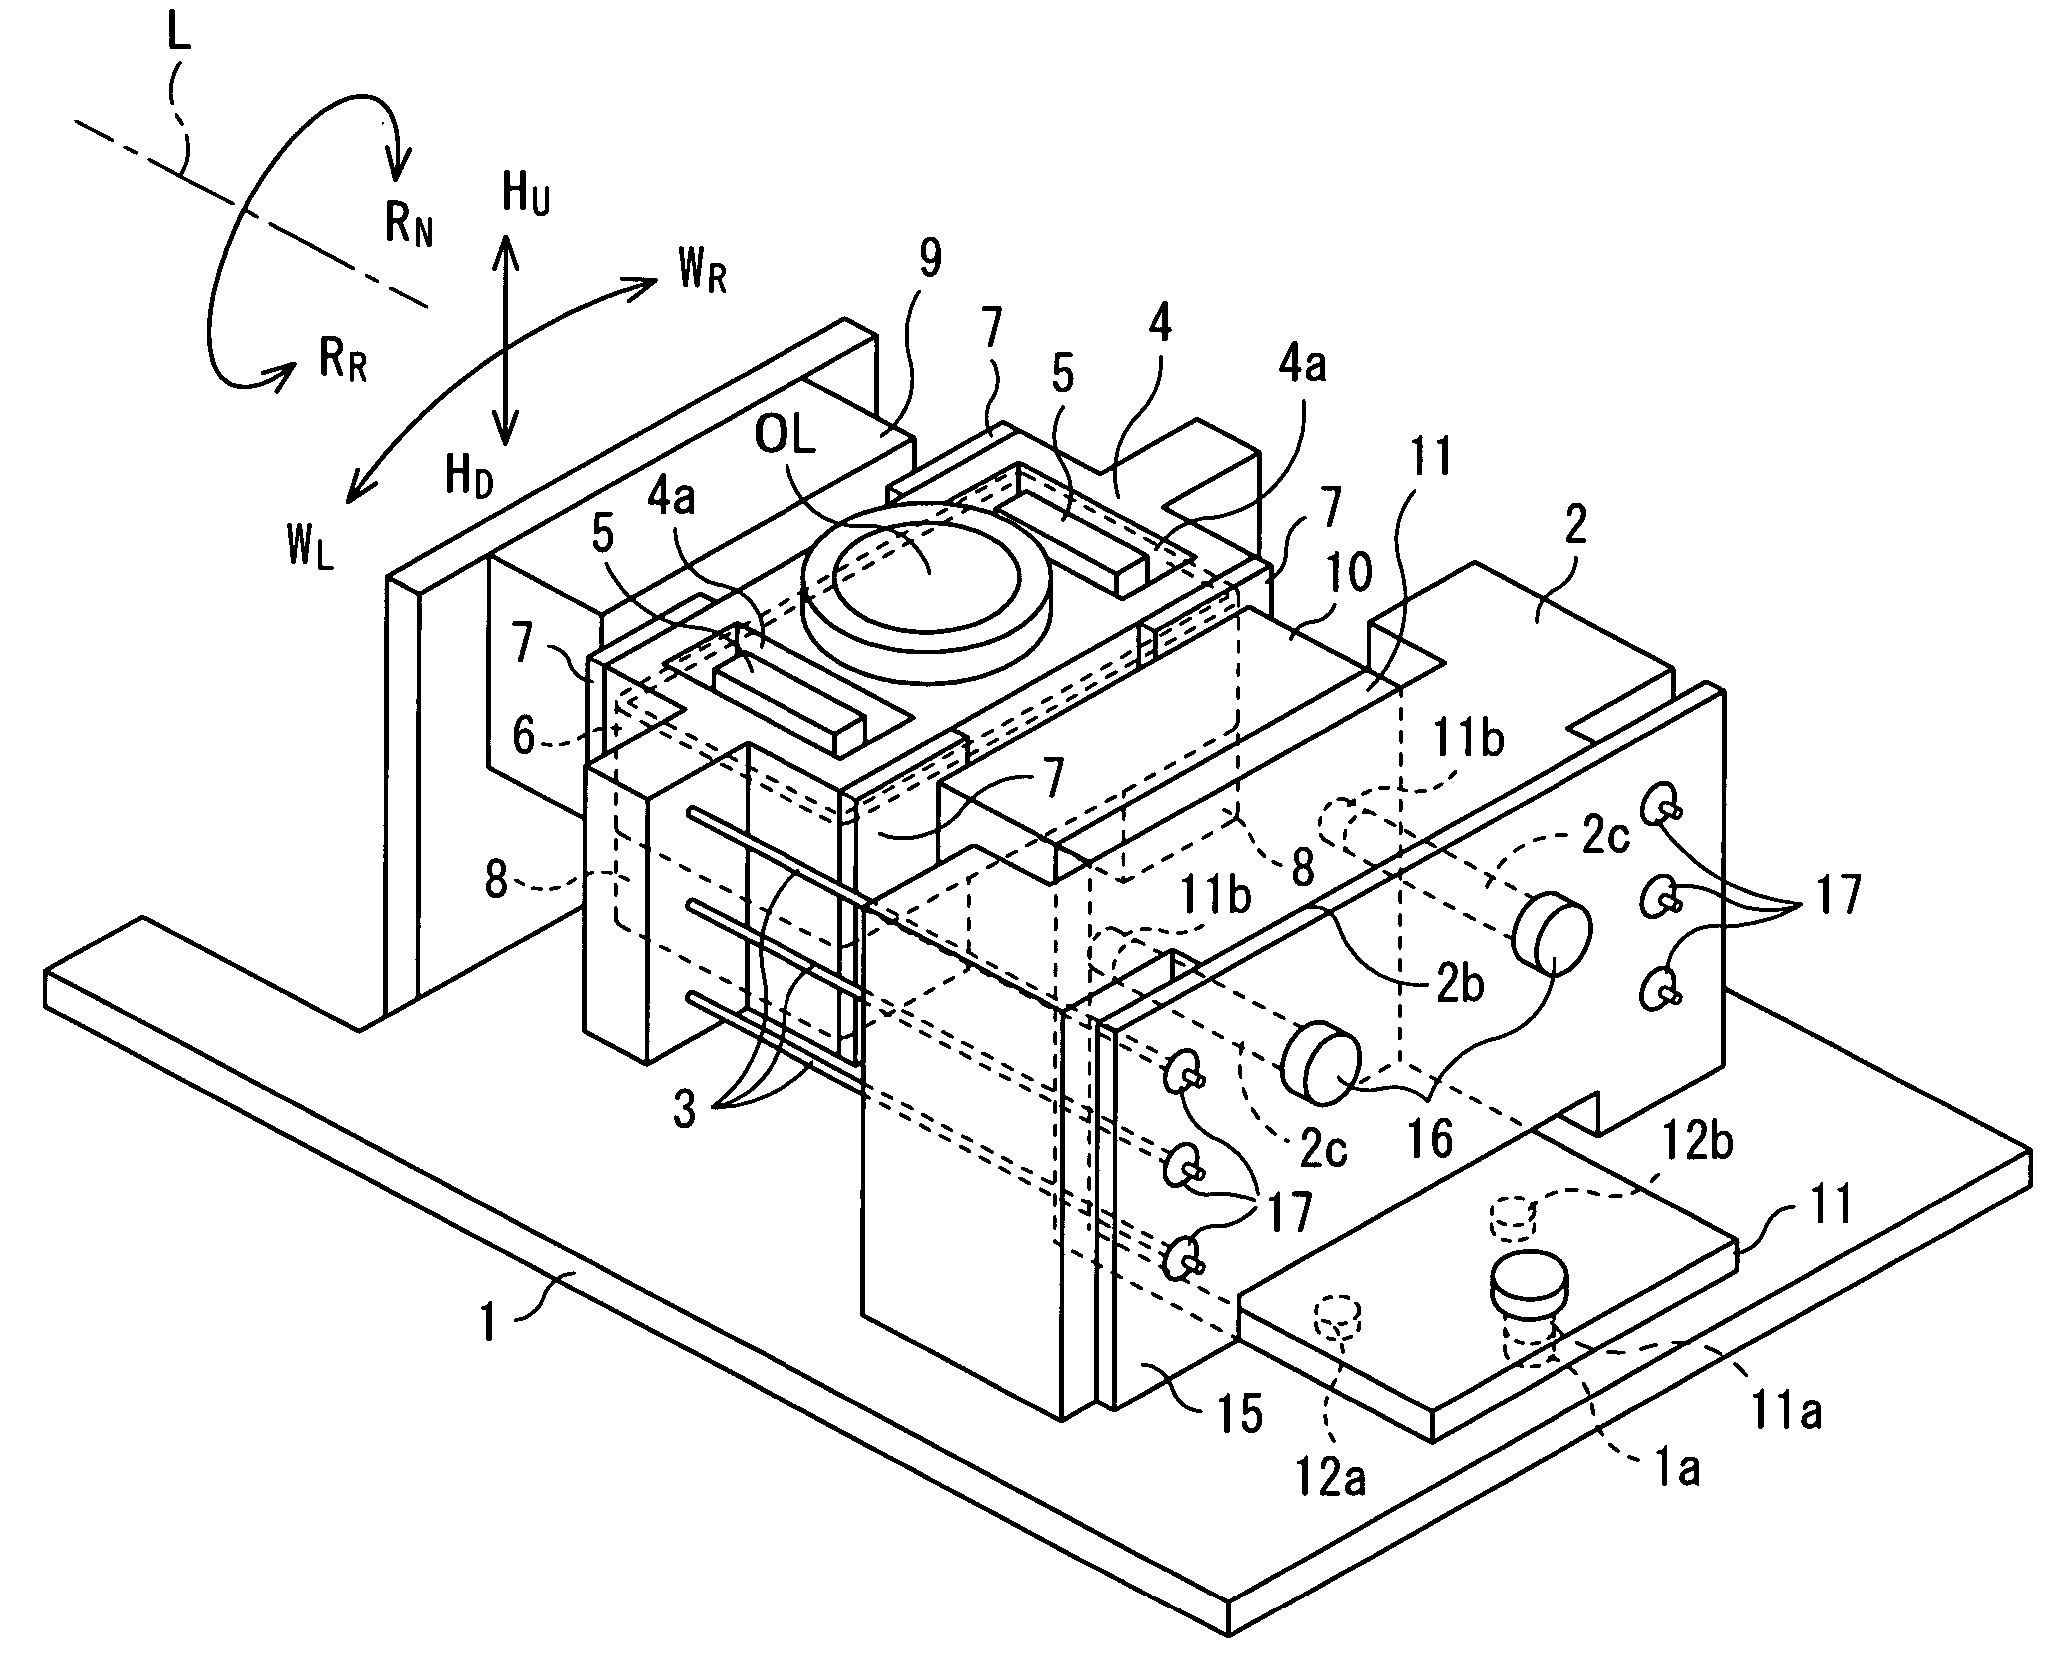 Optical pick-up device with respective flush screws eccentrically positioned between an actuator base and a magnetic holder, together between a printed-circuit board and a support member